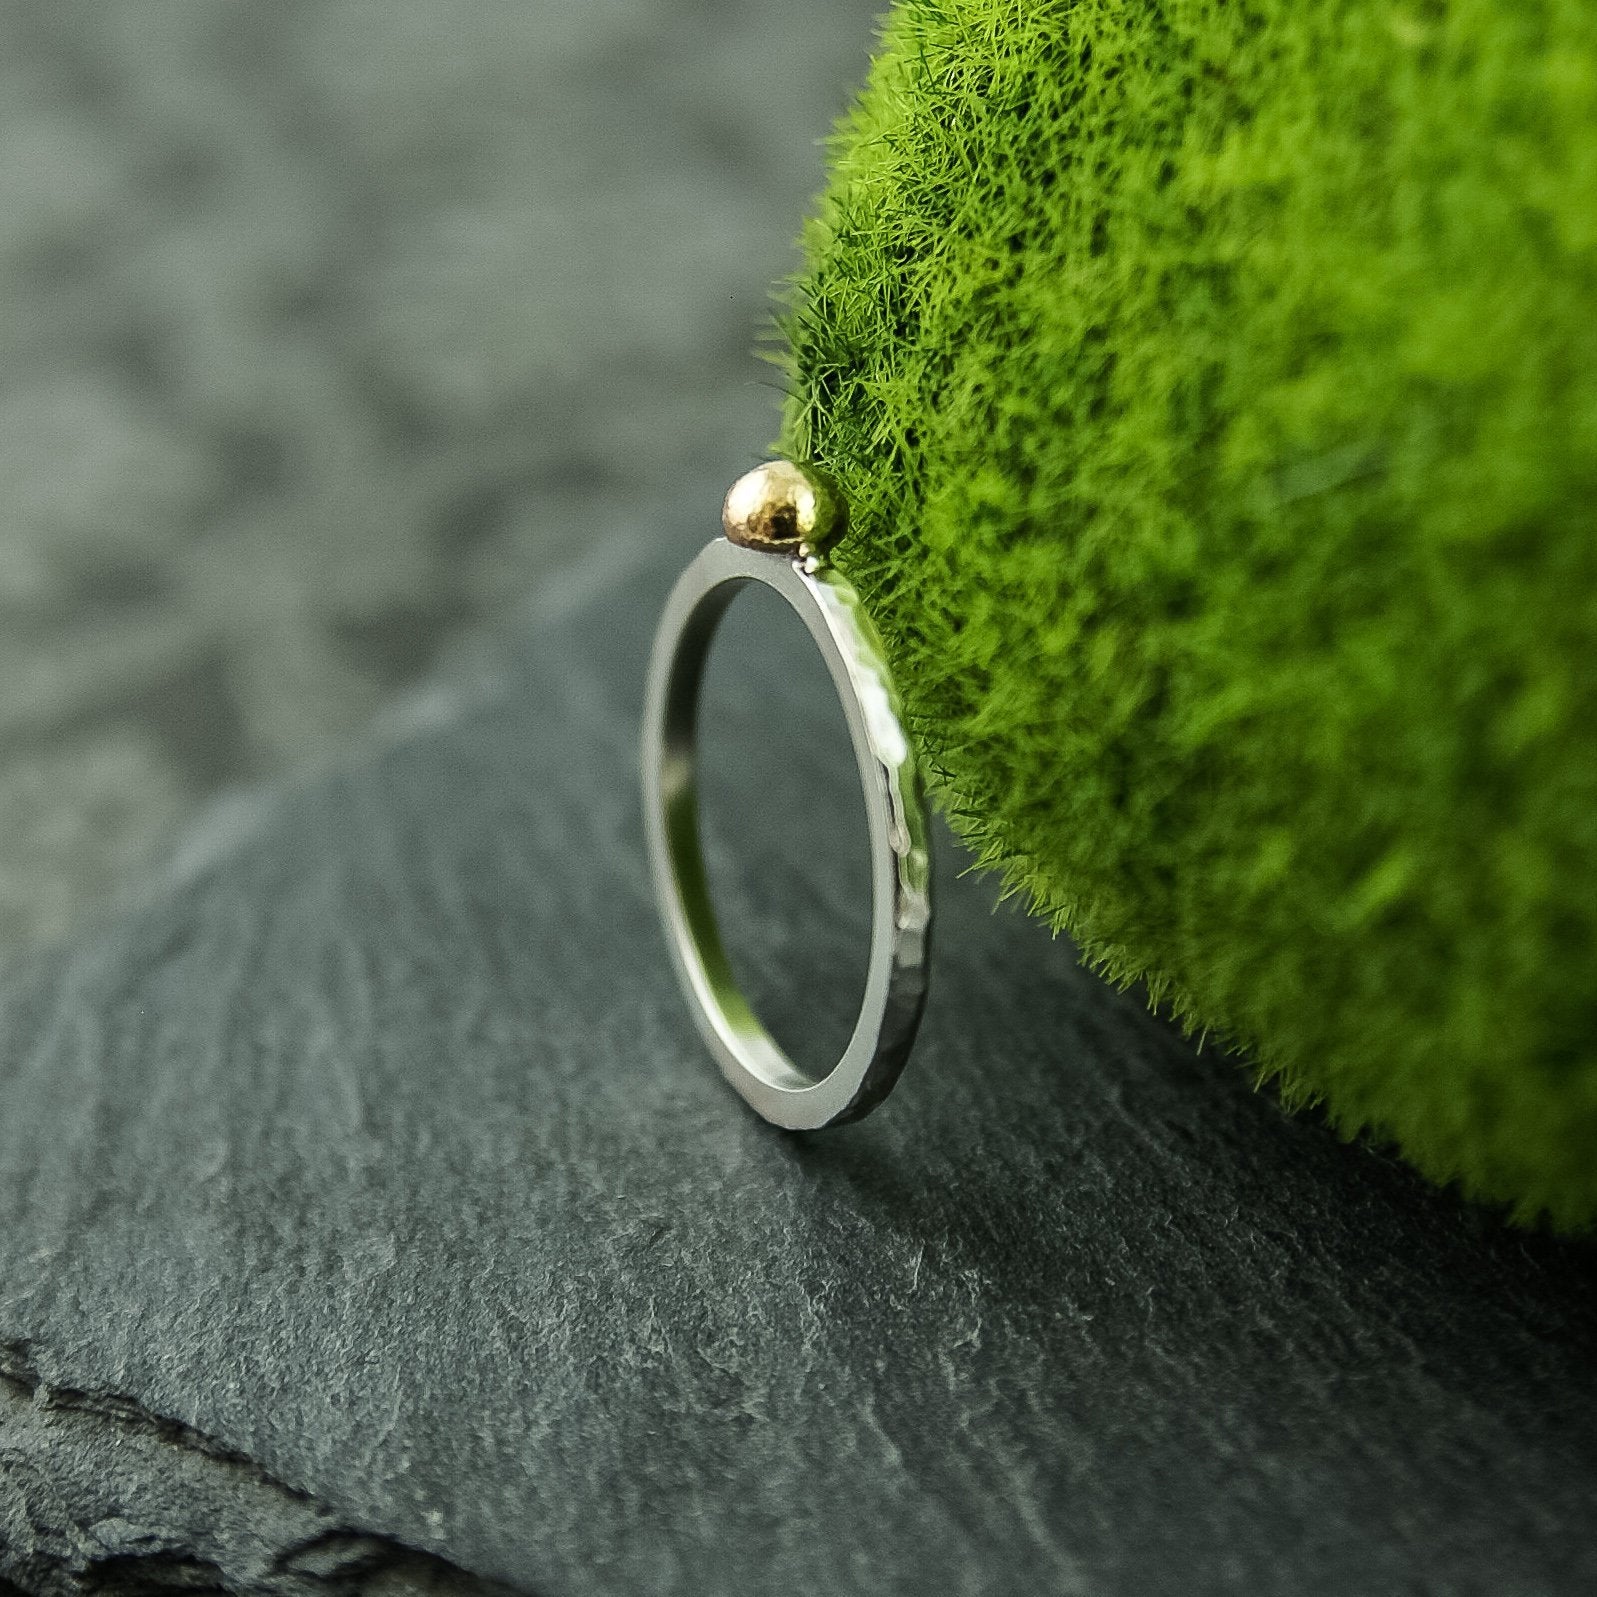 Klondike ring in sterling silver and 14K gold